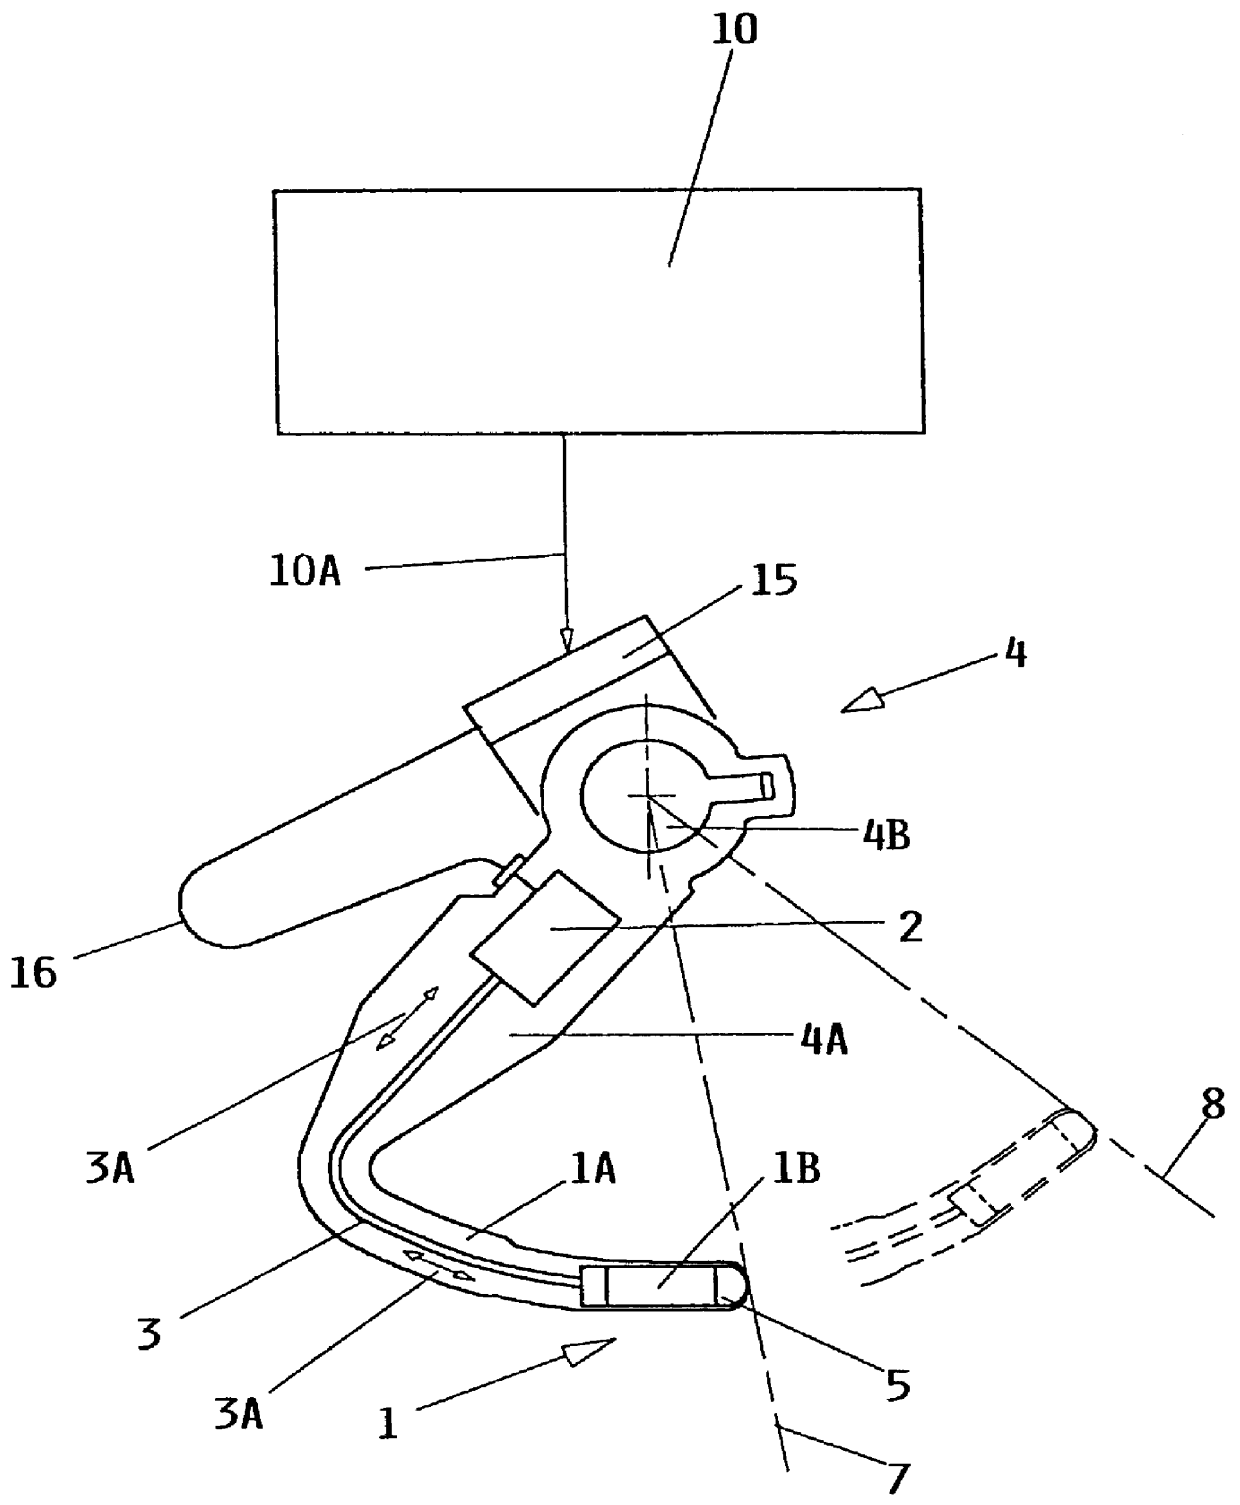 Controllable weft thread presenting and clamping apparatus including an actuated clamp element